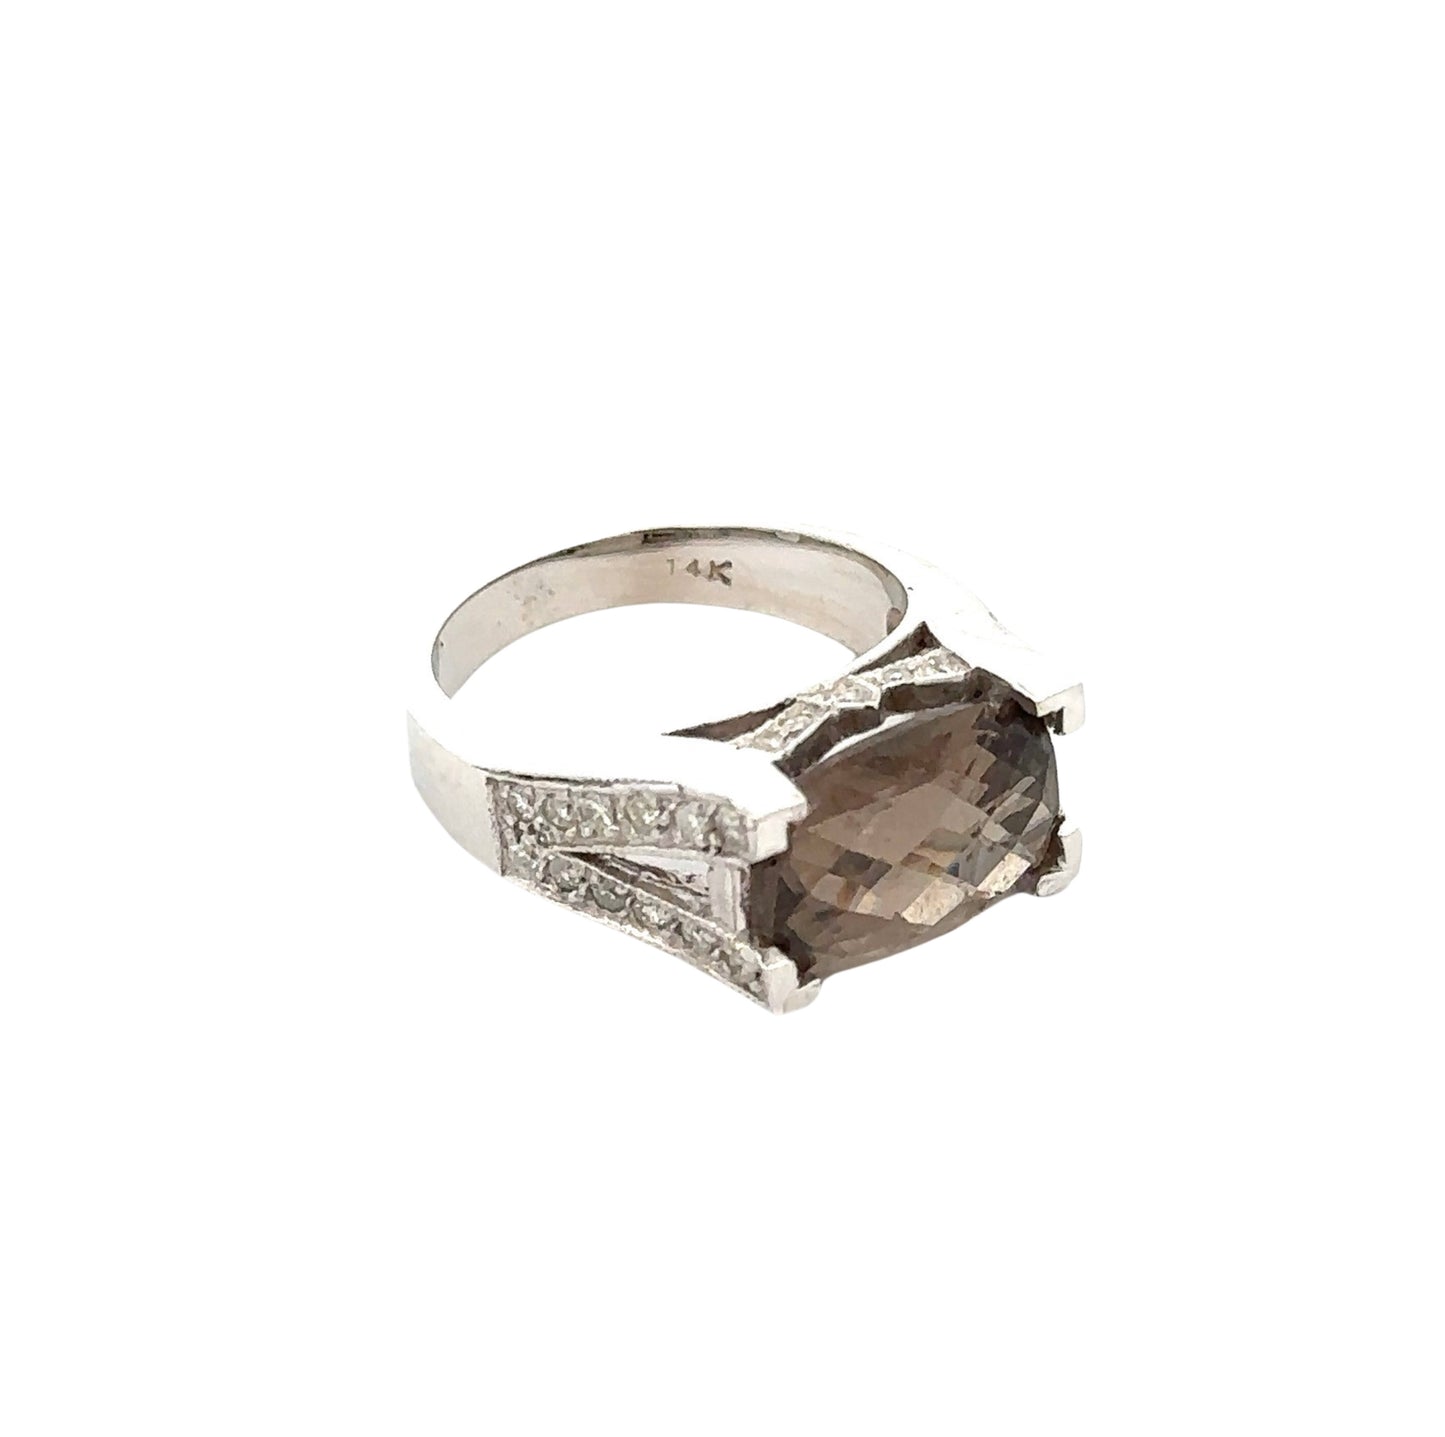 Smoky quartz and diamond ring with 14K stamp inside white gold